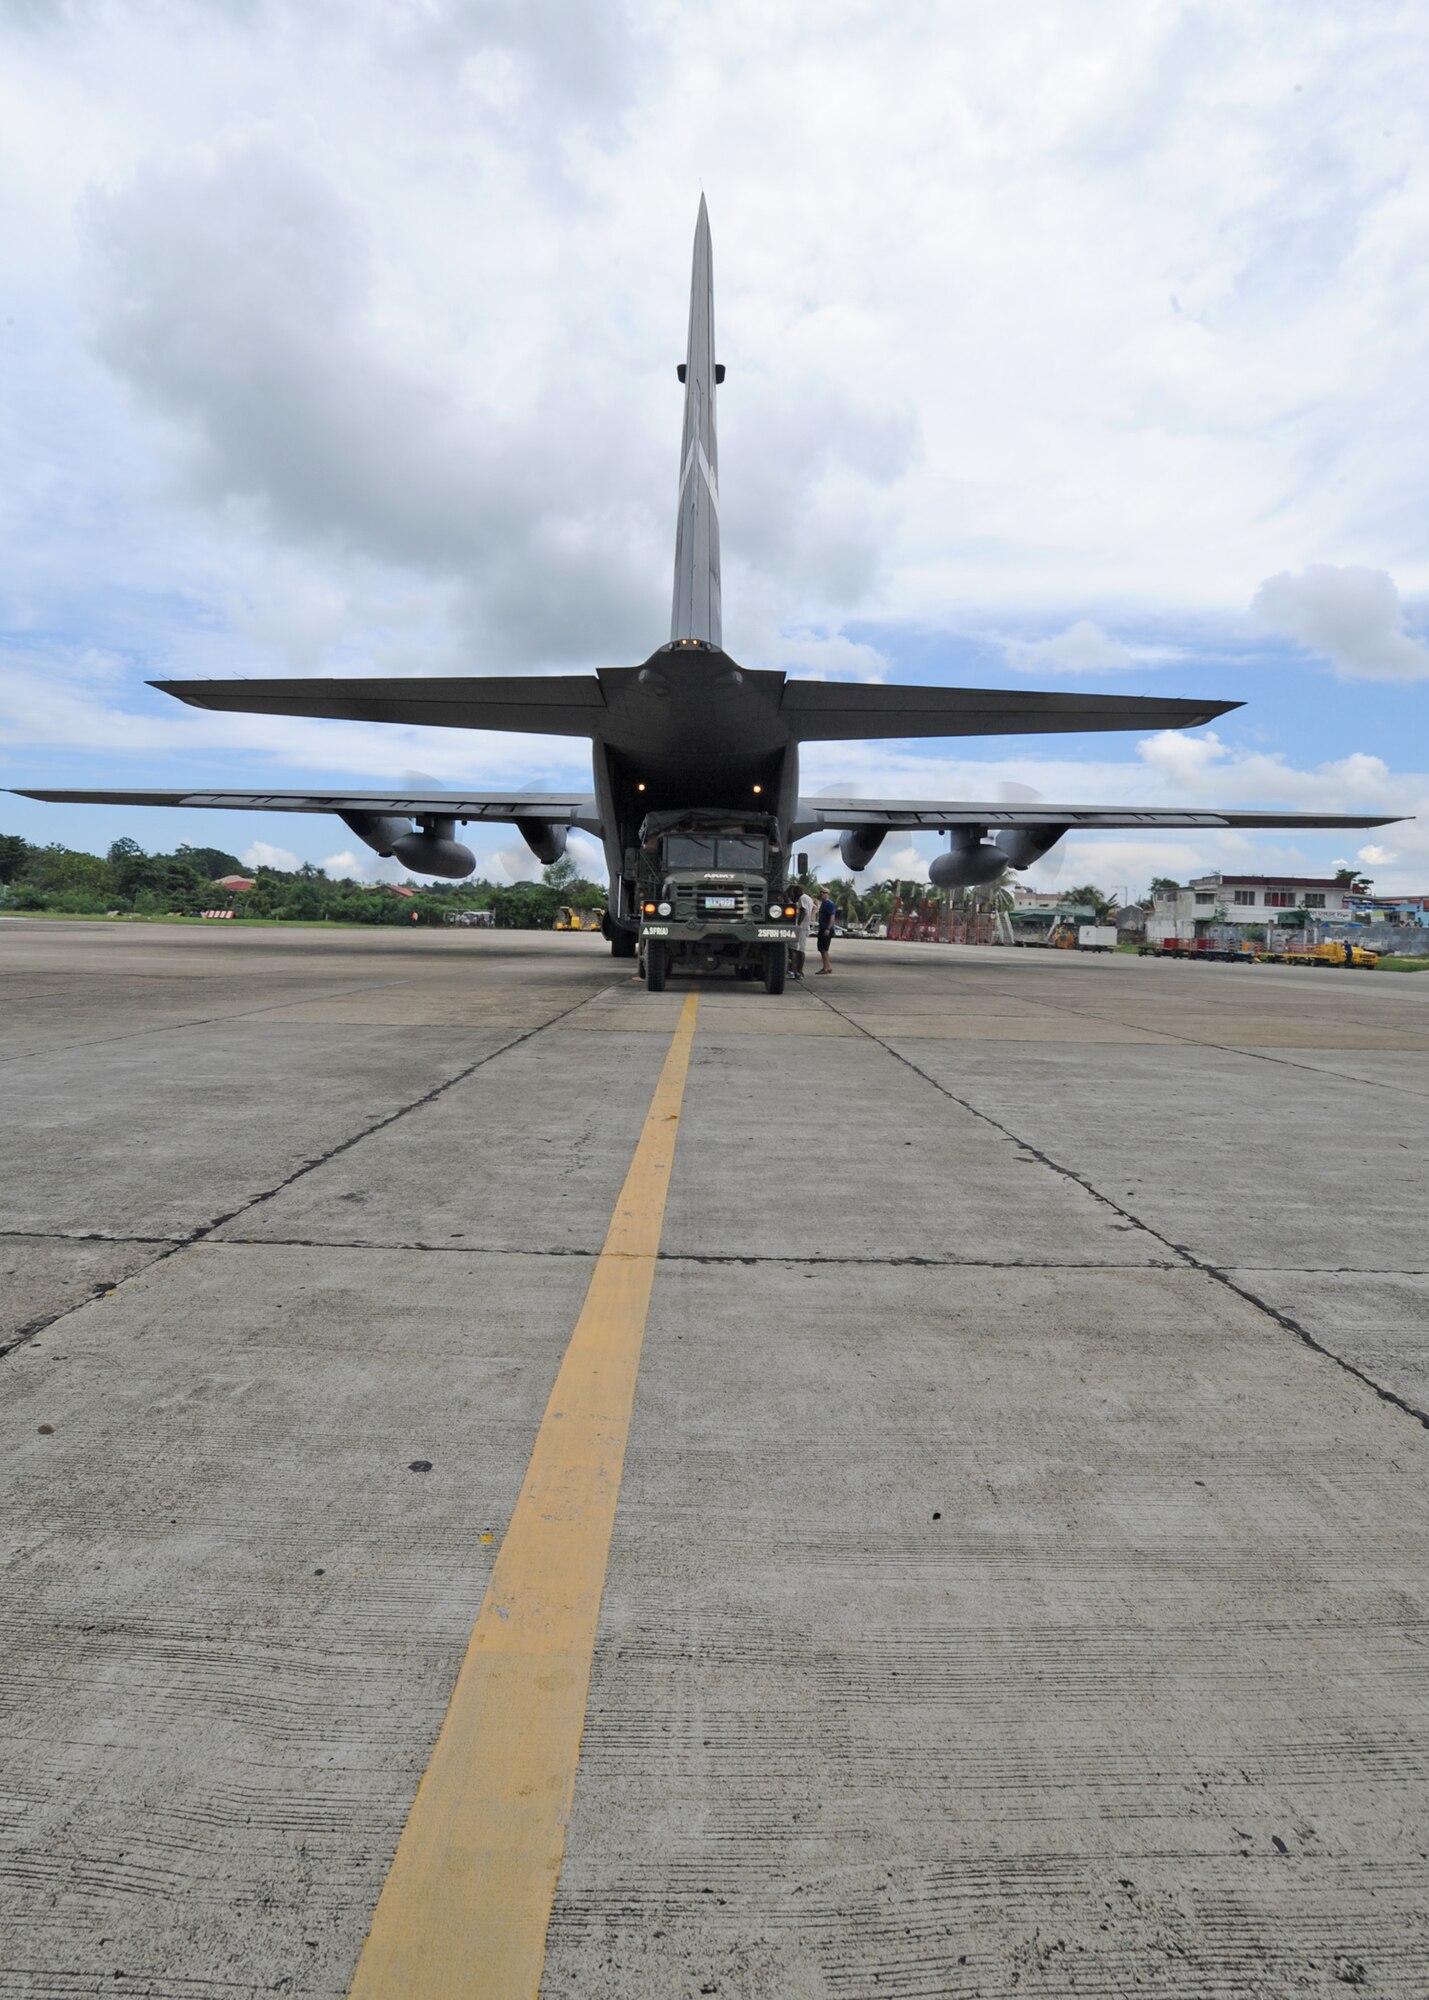 A U.S. Air Force C-130 Hercules from the Minnesota Air National Guard’s 133rd Airlift Wing is parked with engines running at the Tagbiliran Airport as Members of the Armed Forces of the Philippines and U.S. Military members transfer supplies to an Armed Forces of the Philippines vehicle in support of Pacific Angel Philippines at Tagbiliran, Philippines, Aug. 13, 2015. Pacific Angel is a multilateral humanitarian assistance civil military operation, which improves military-to-military partnerships in the Pacific while also providing medical health outreach, civic engineering projects and subject matter exchanges among partner forces.(U.S. Air Force photo by Tech. Sgt. Aaron Oelrich/Released)